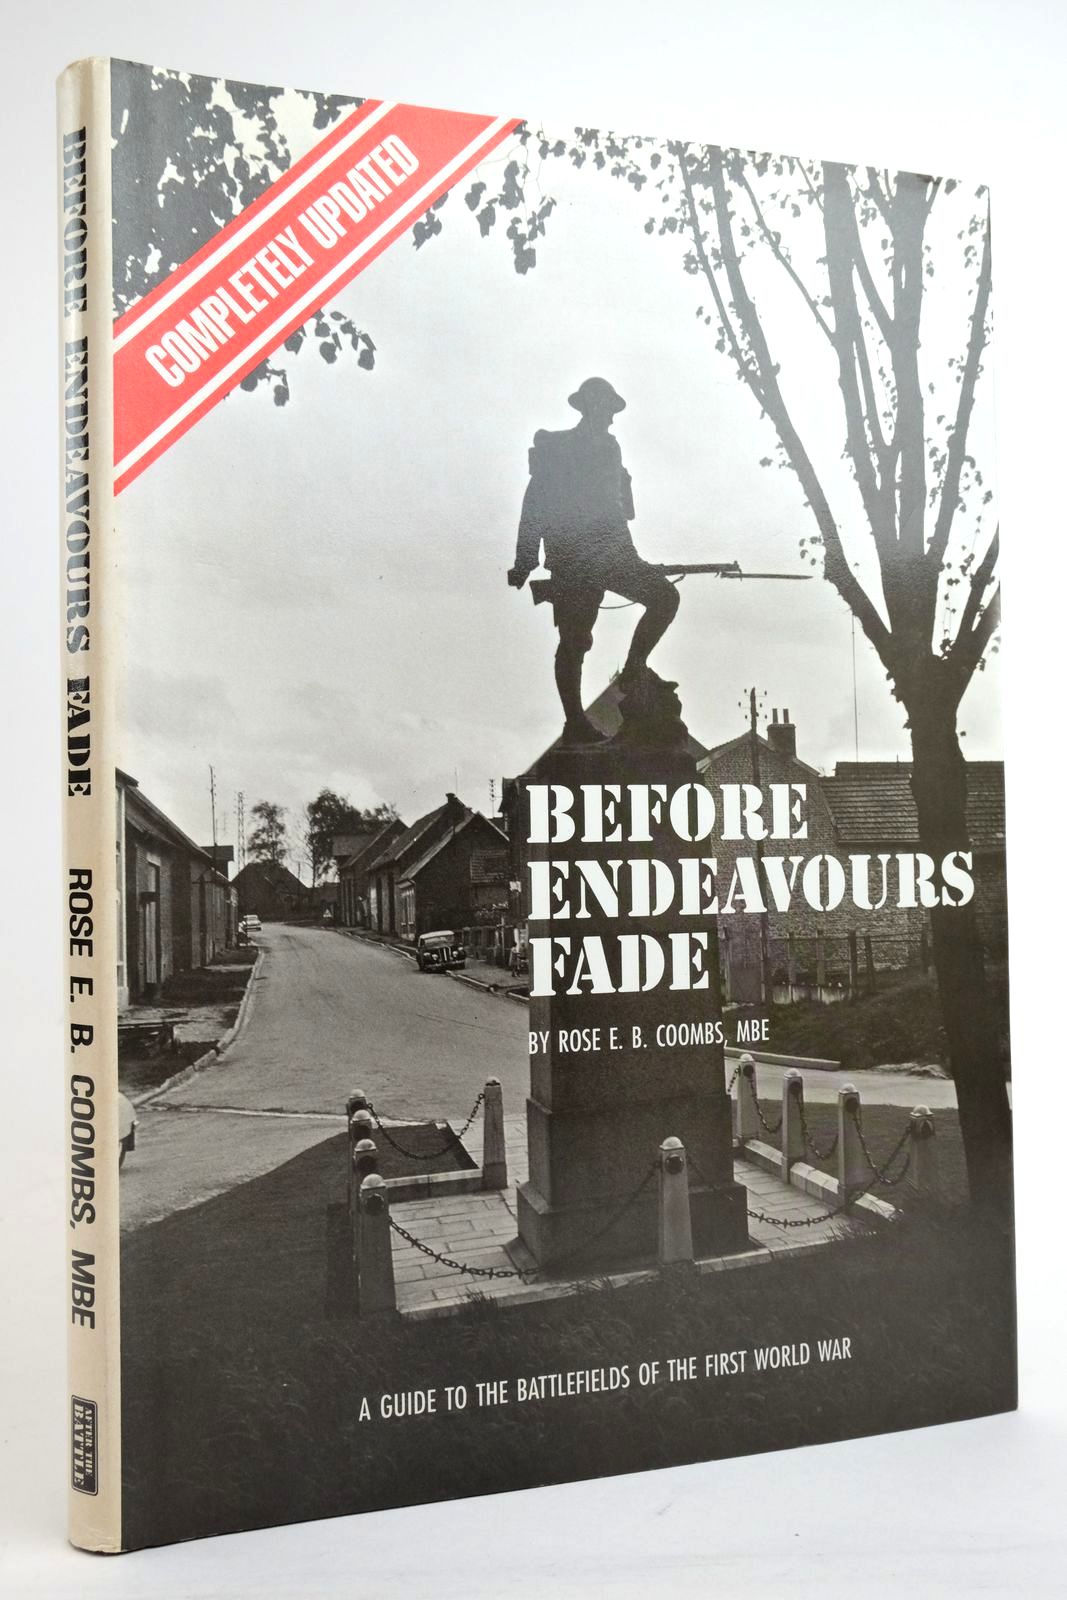 Photo of BEFORE ENDEAVOURS FADE written by Coombs, Rose E.B. published by Battle of Britain Prints International Ltd. (STOCK CODE: 2136349)  for sale by Stella & Rose's Books